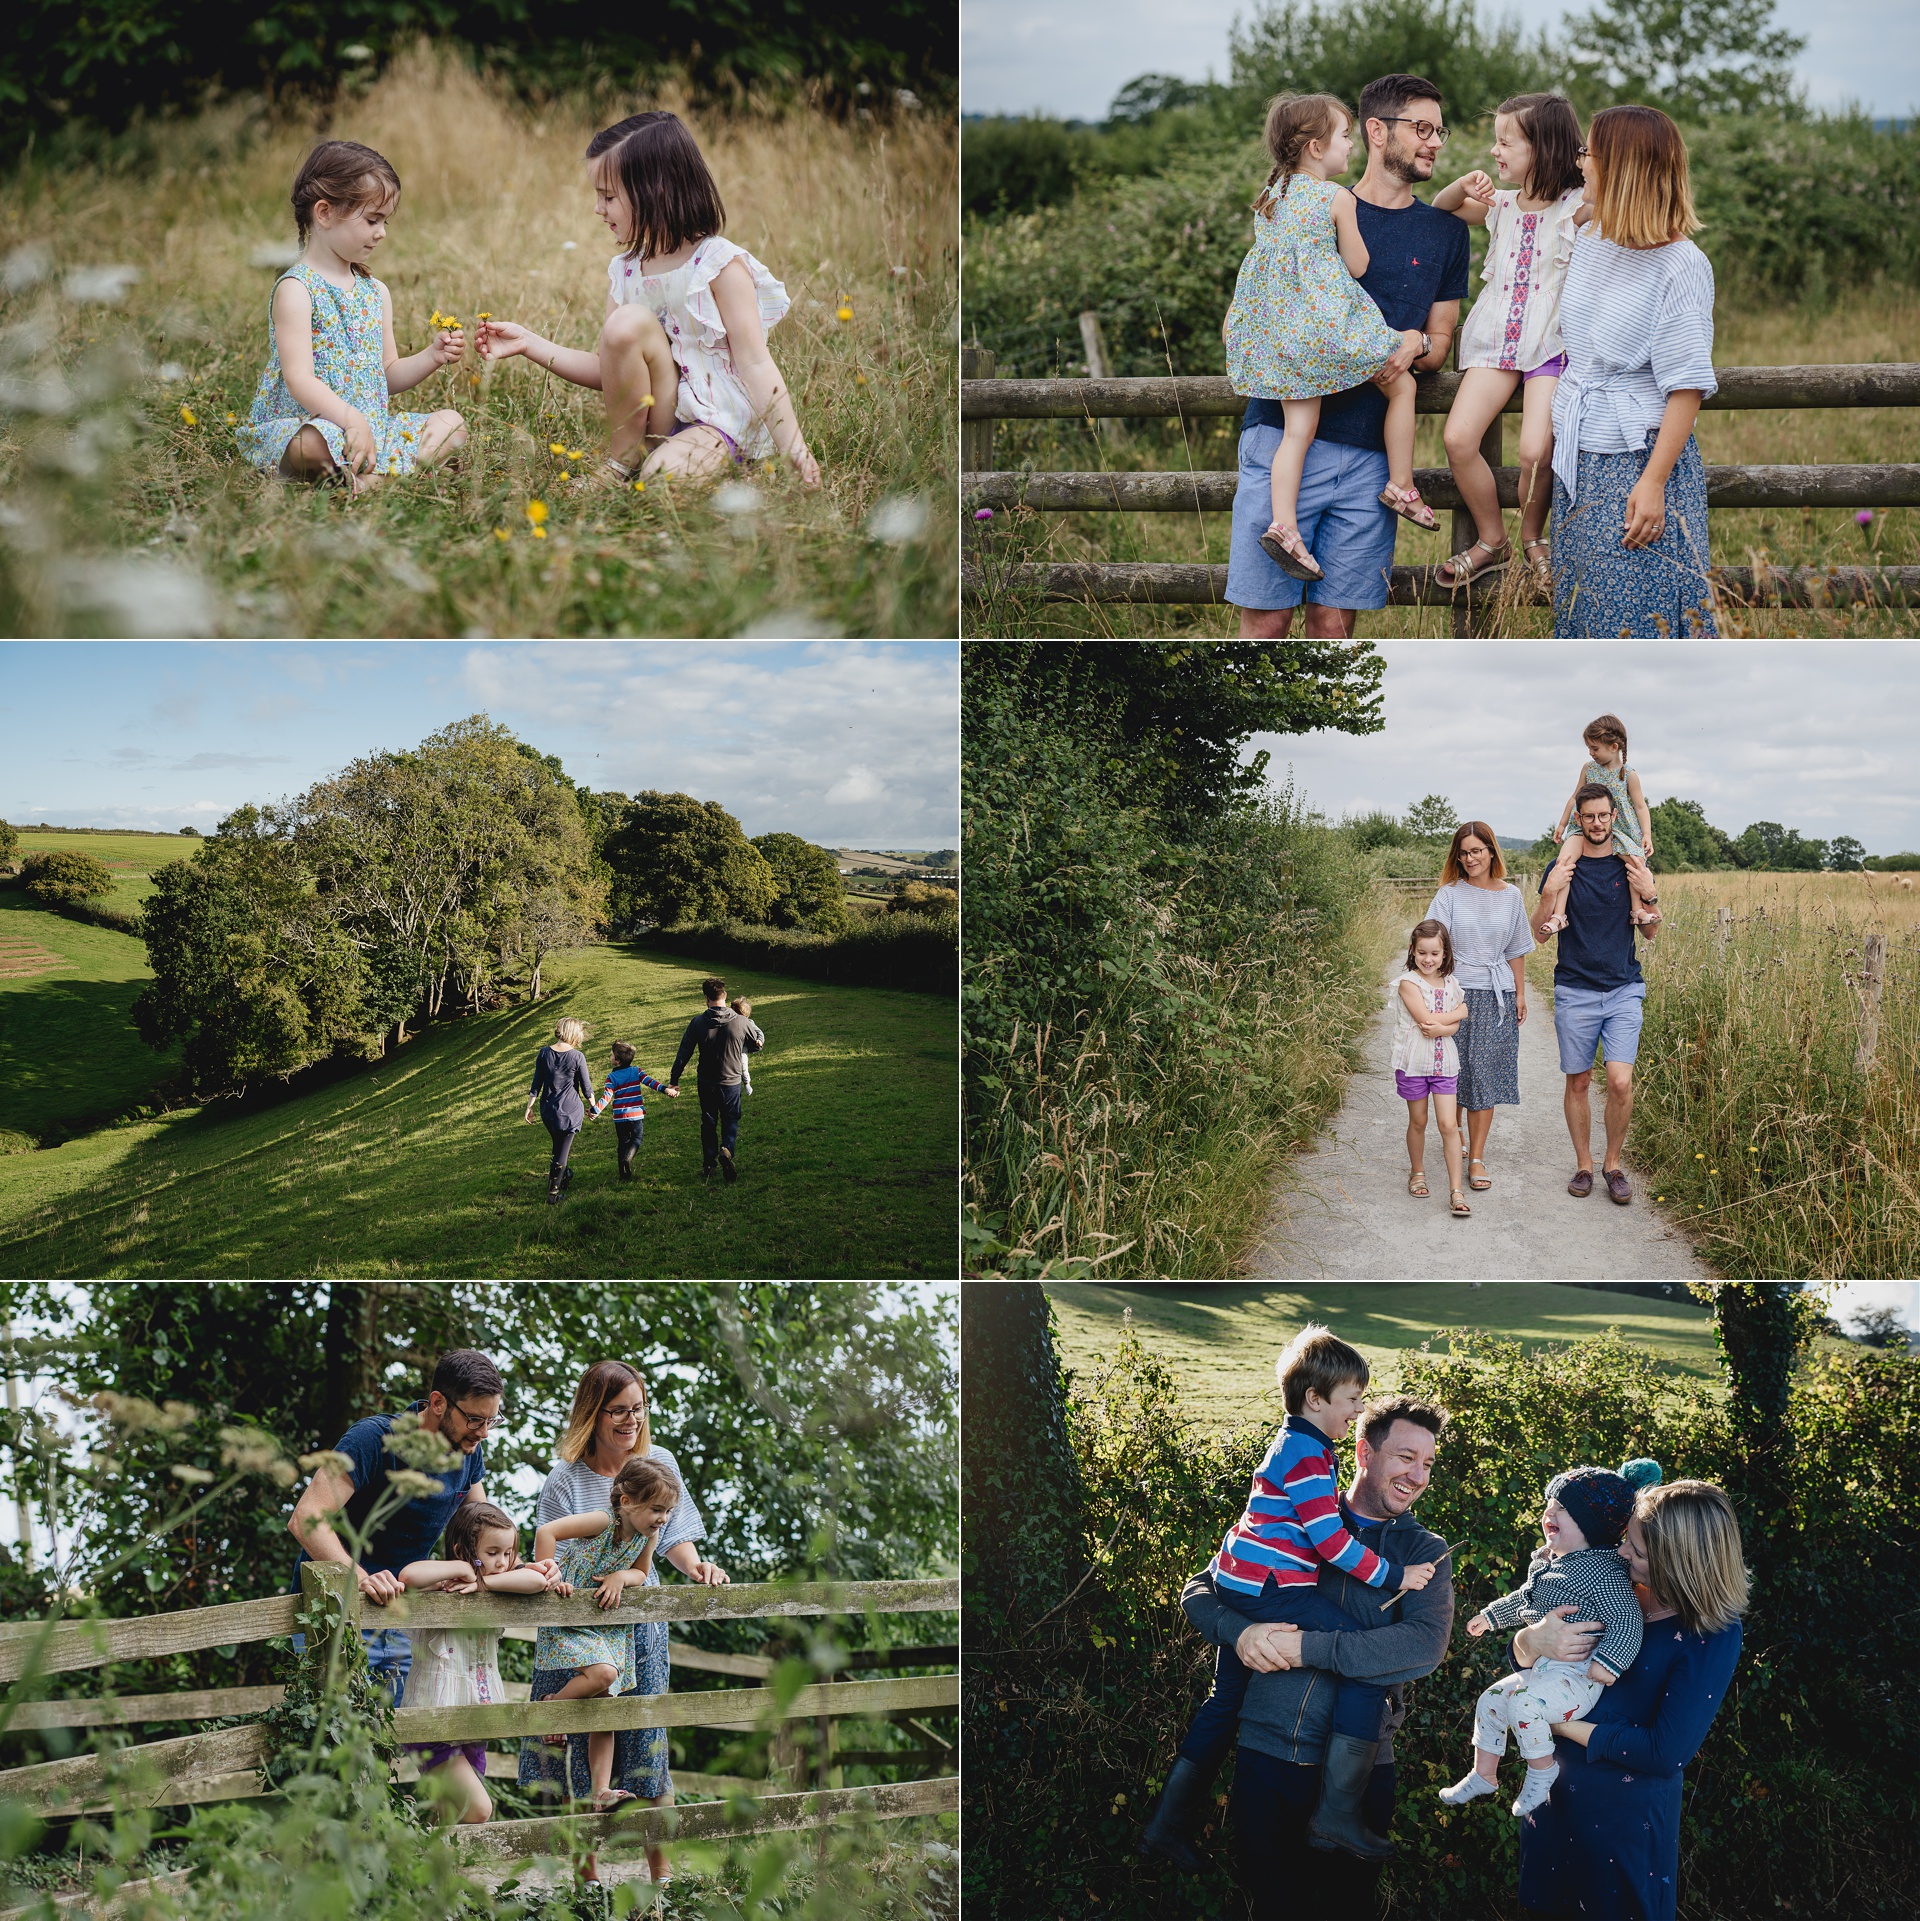 Some Devon family photographs in different locations